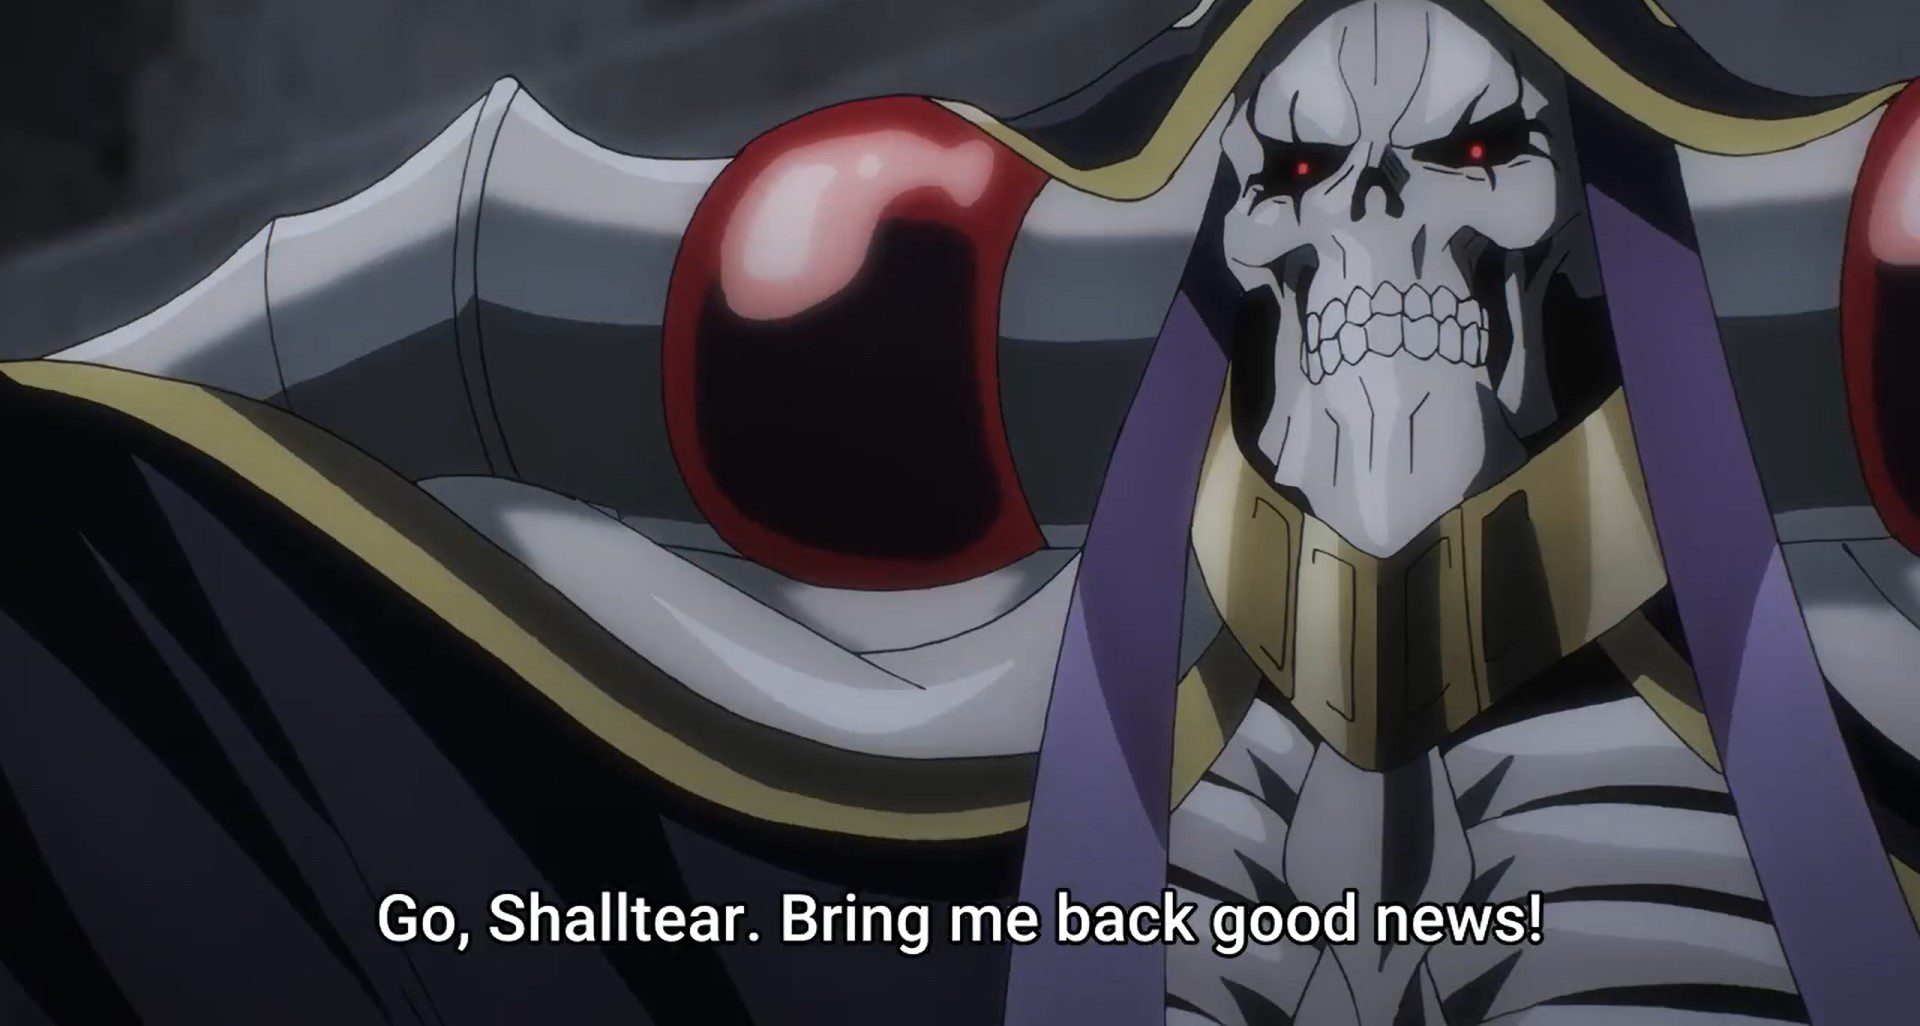 Overlord Season 4 Episode 6 Expectations